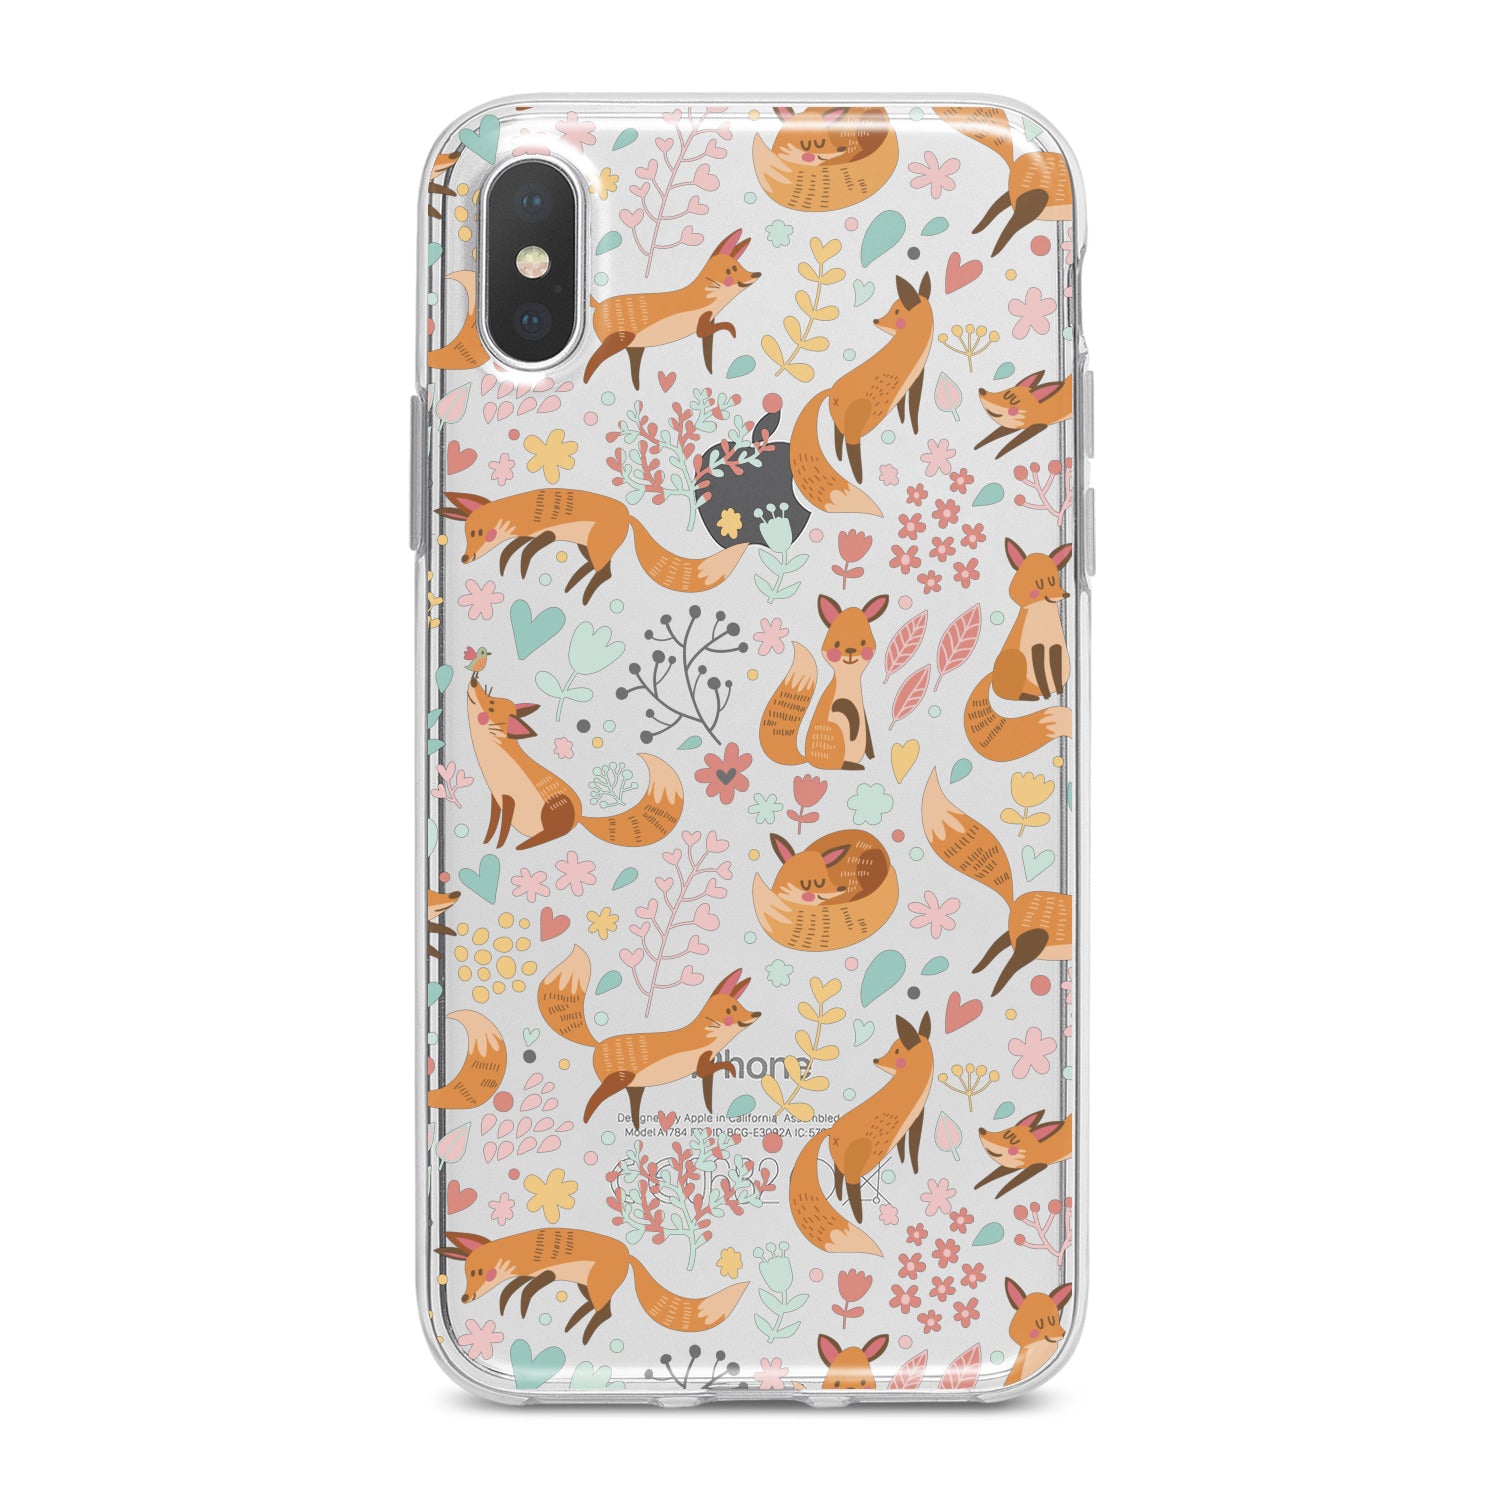 Lex Altern Fox Wildflower Phone Case for your iPhone & Android phone.